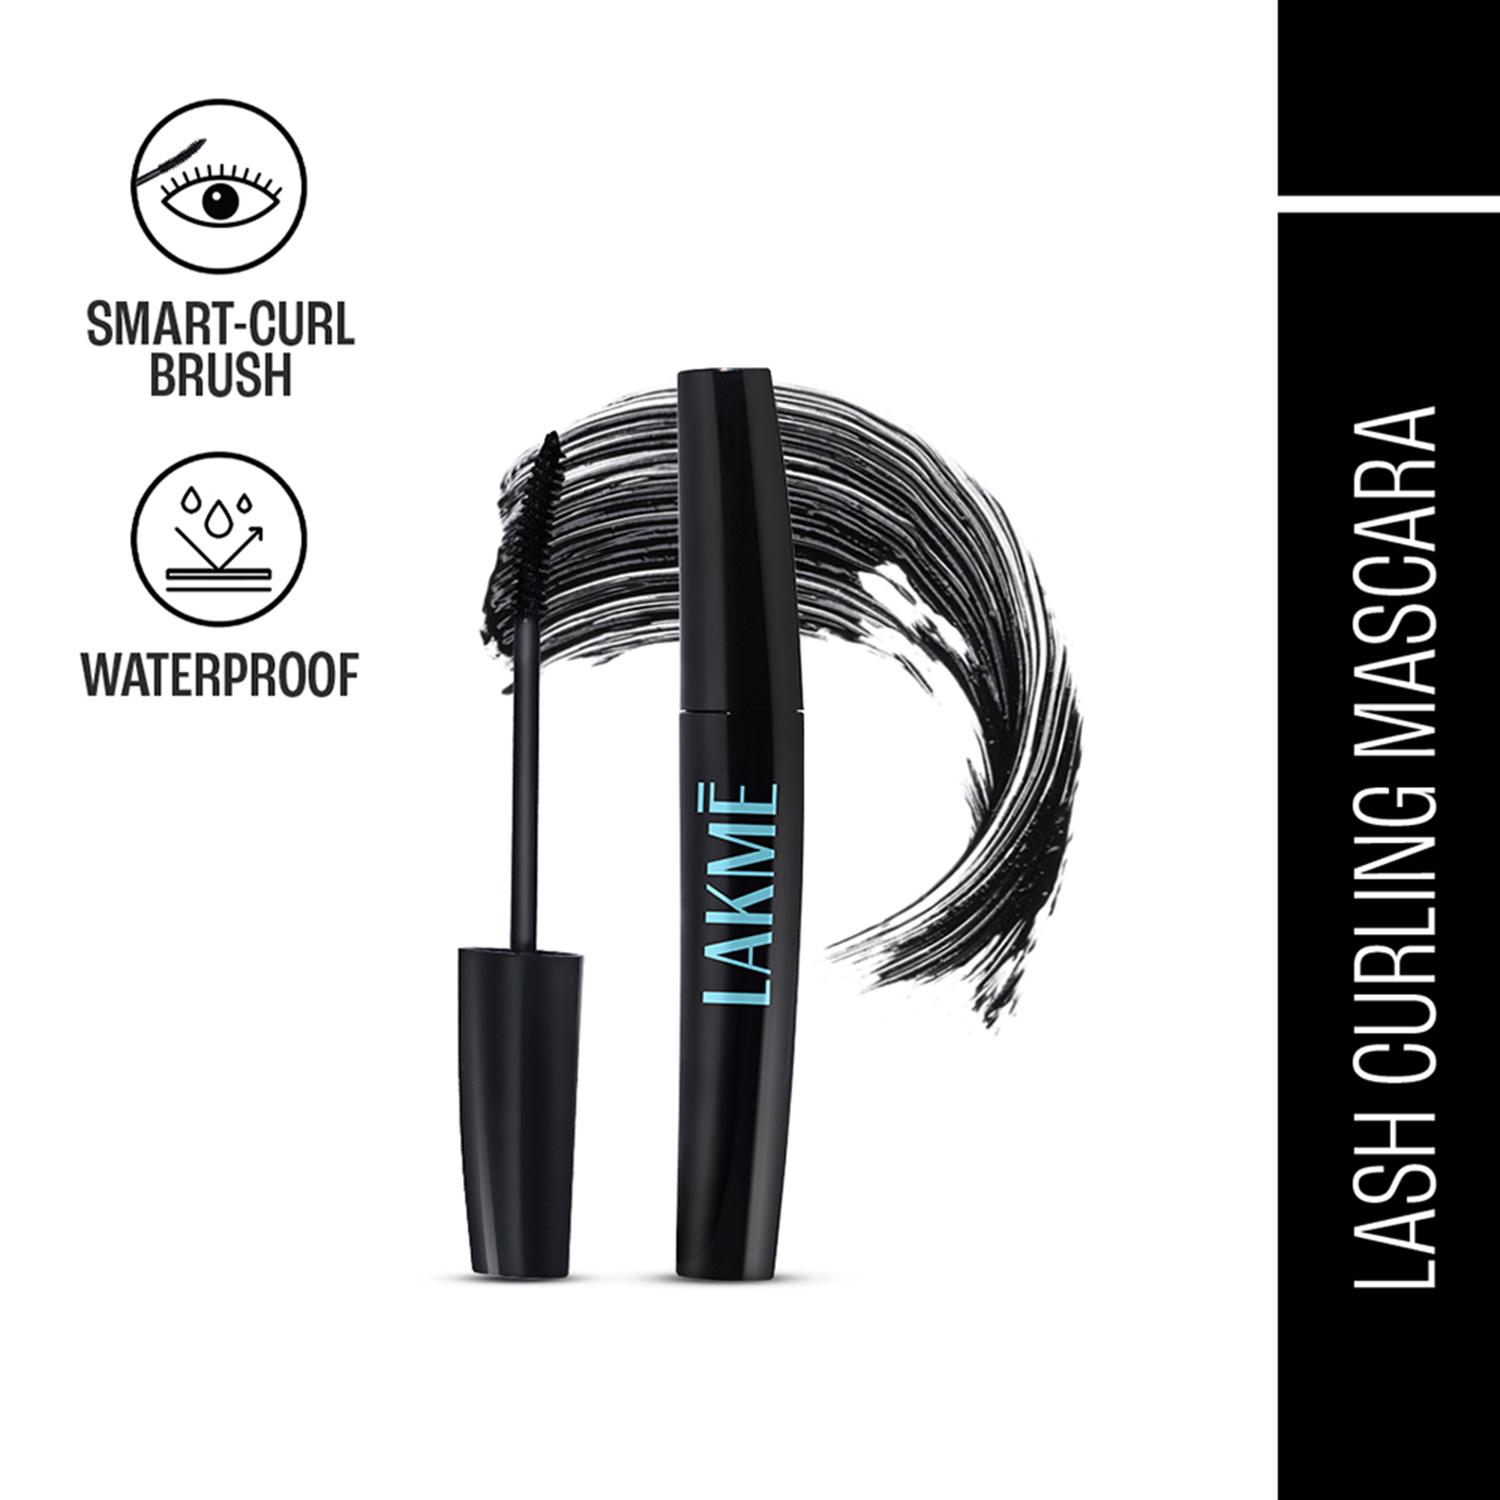 Lakme | Lakme 9 to 5 Eyeconic Curling Mascara Smudgeproof Waterproof lasts upto 24 Hrs Black (6 ml)